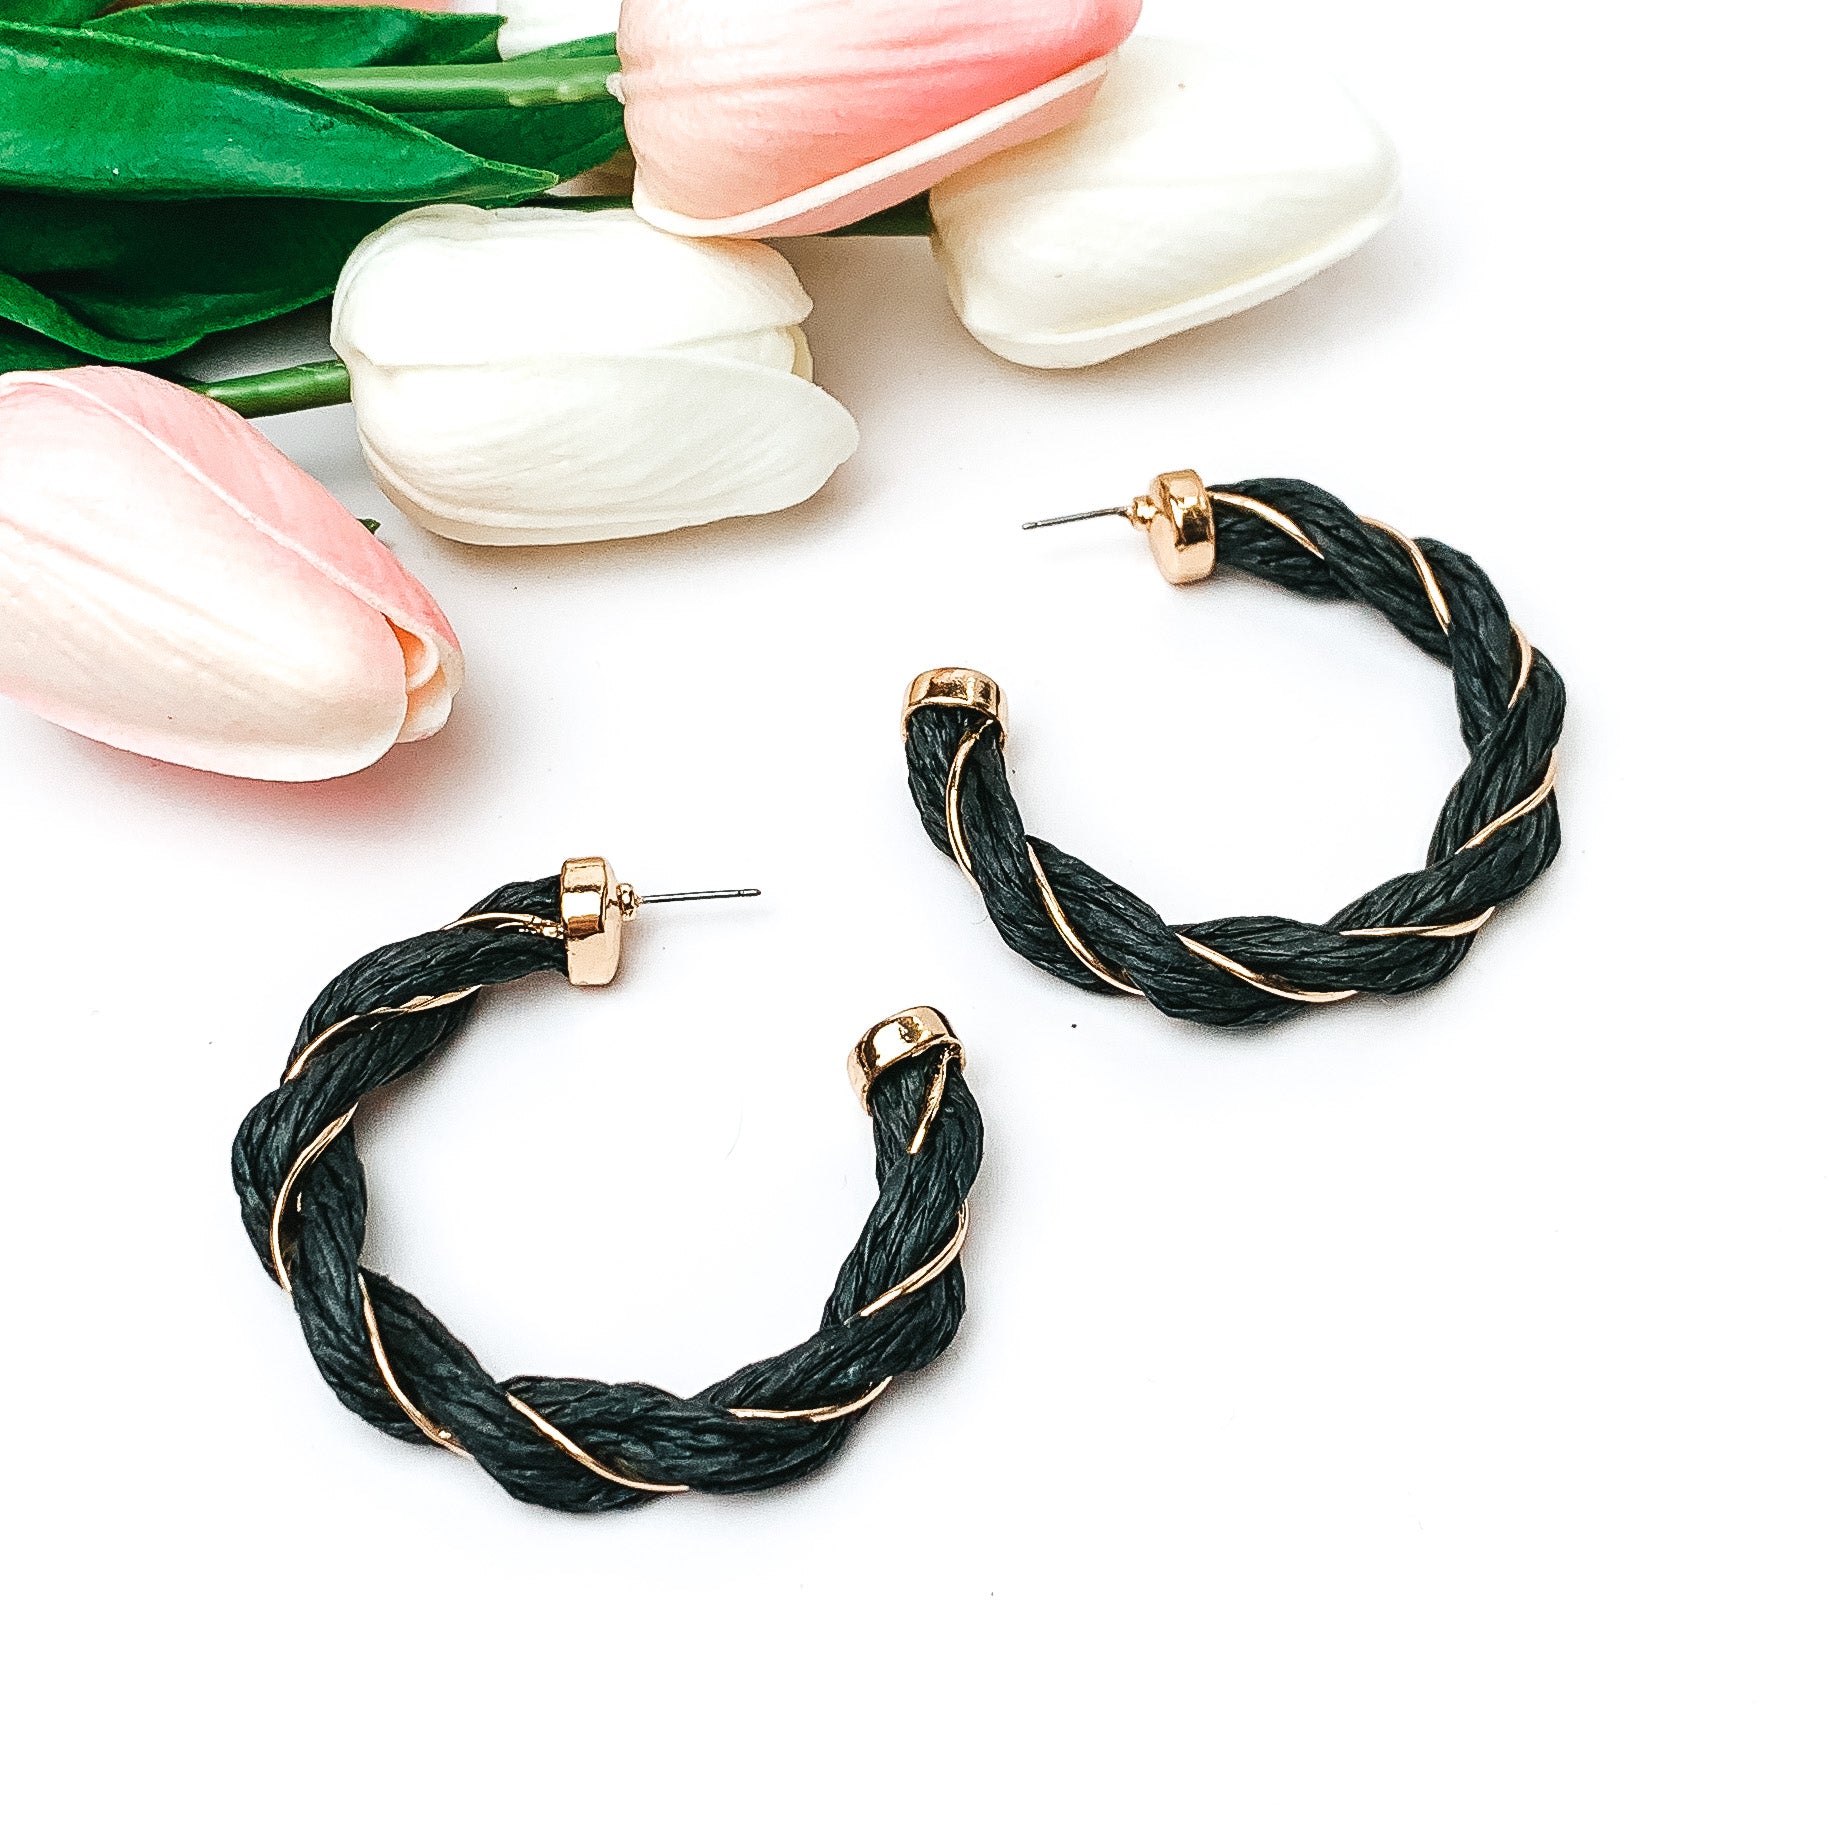 Pictured are black raffia twisted hoop earrings with gold detailing.  They are pictured with pink and white tulips on a white background.